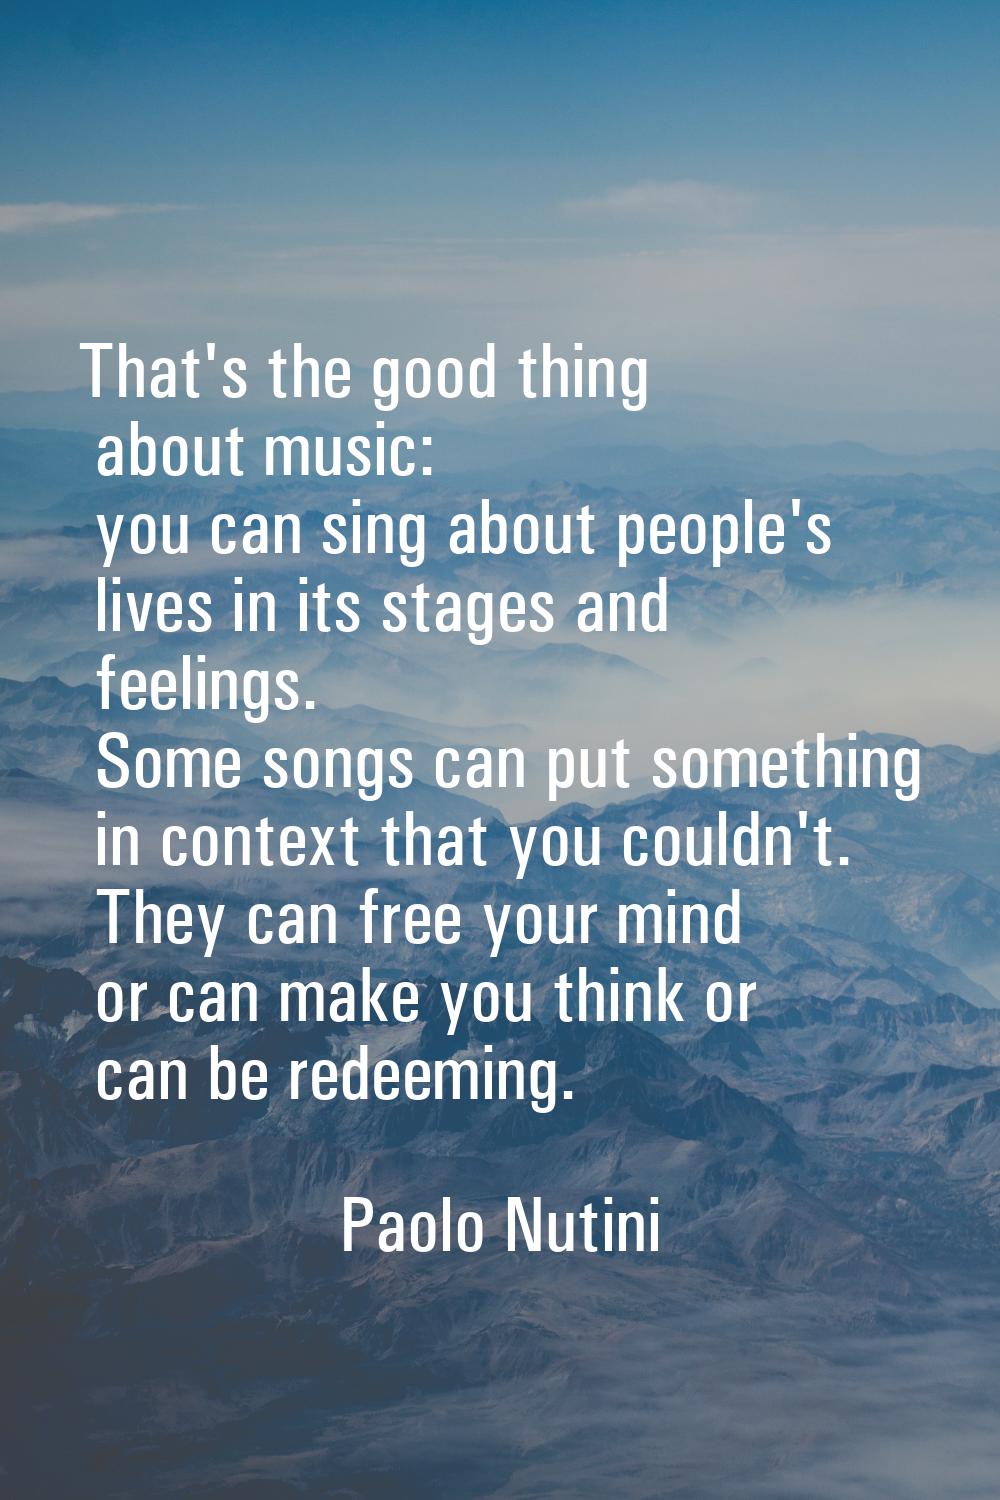 That's the good thing about music: you can sing about people's lives in its stages and feelings. So